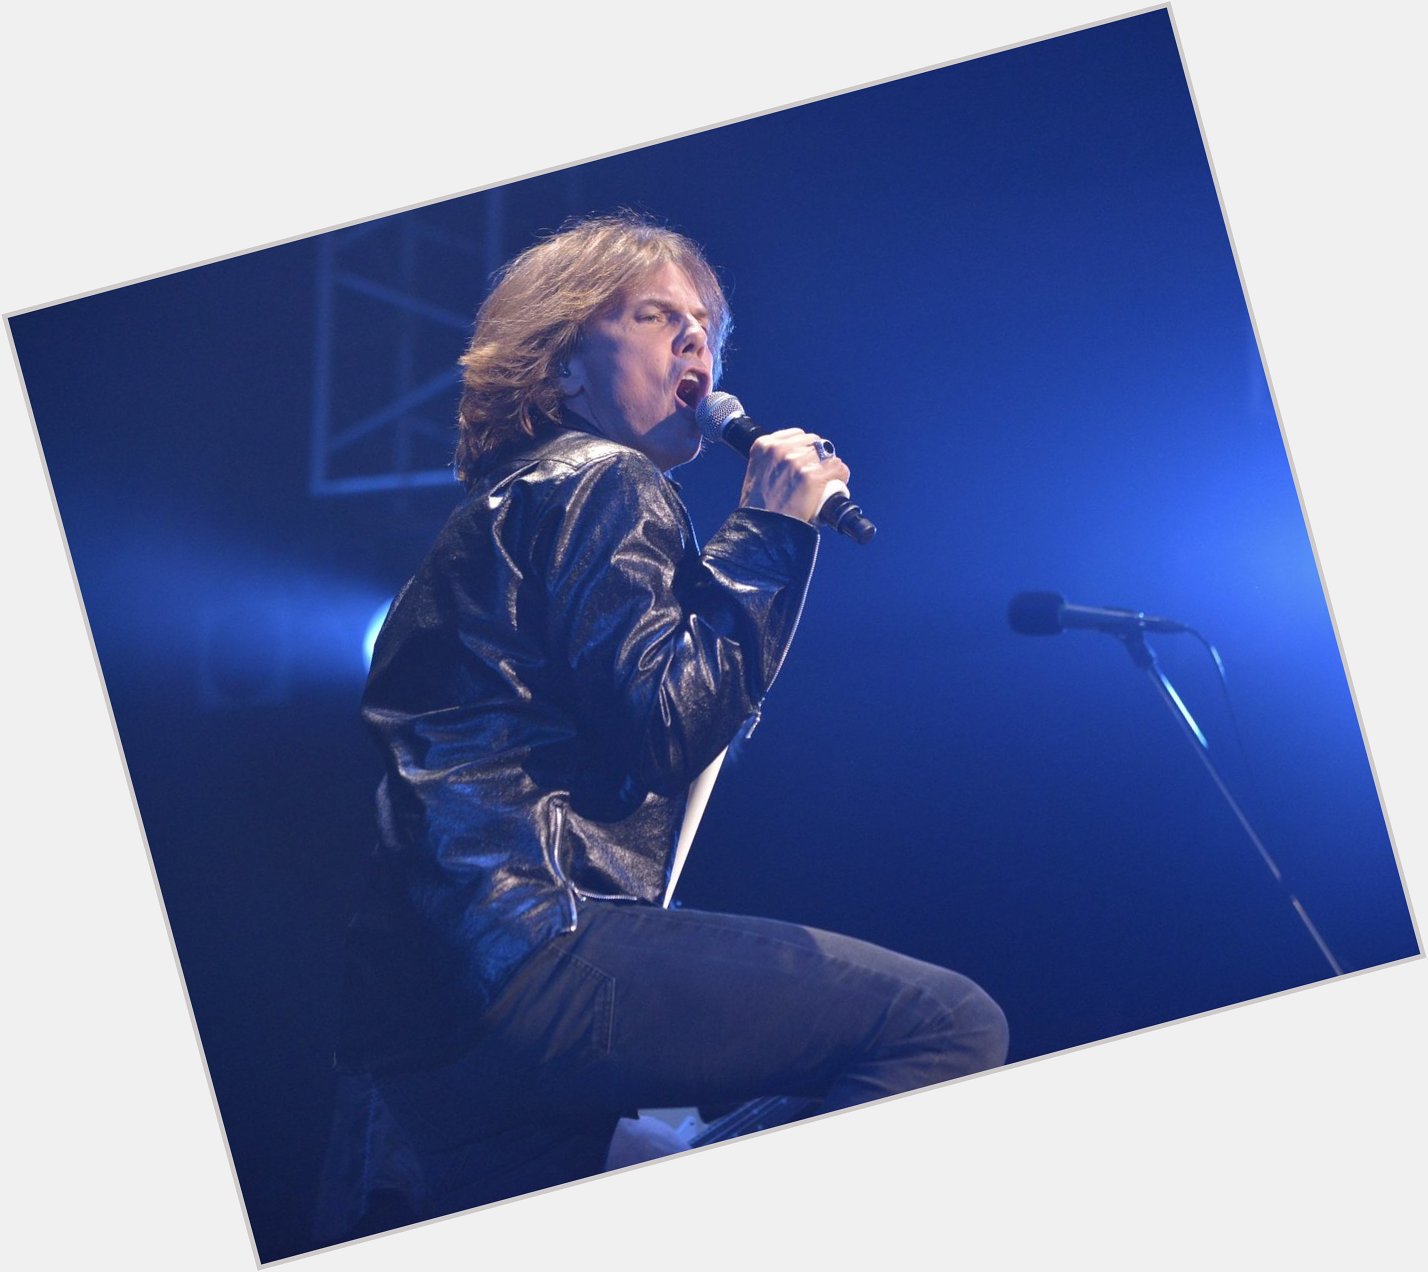    8/19                   The Final Countdown       Europe             59       Happy birthday to Joey Tempest!!  